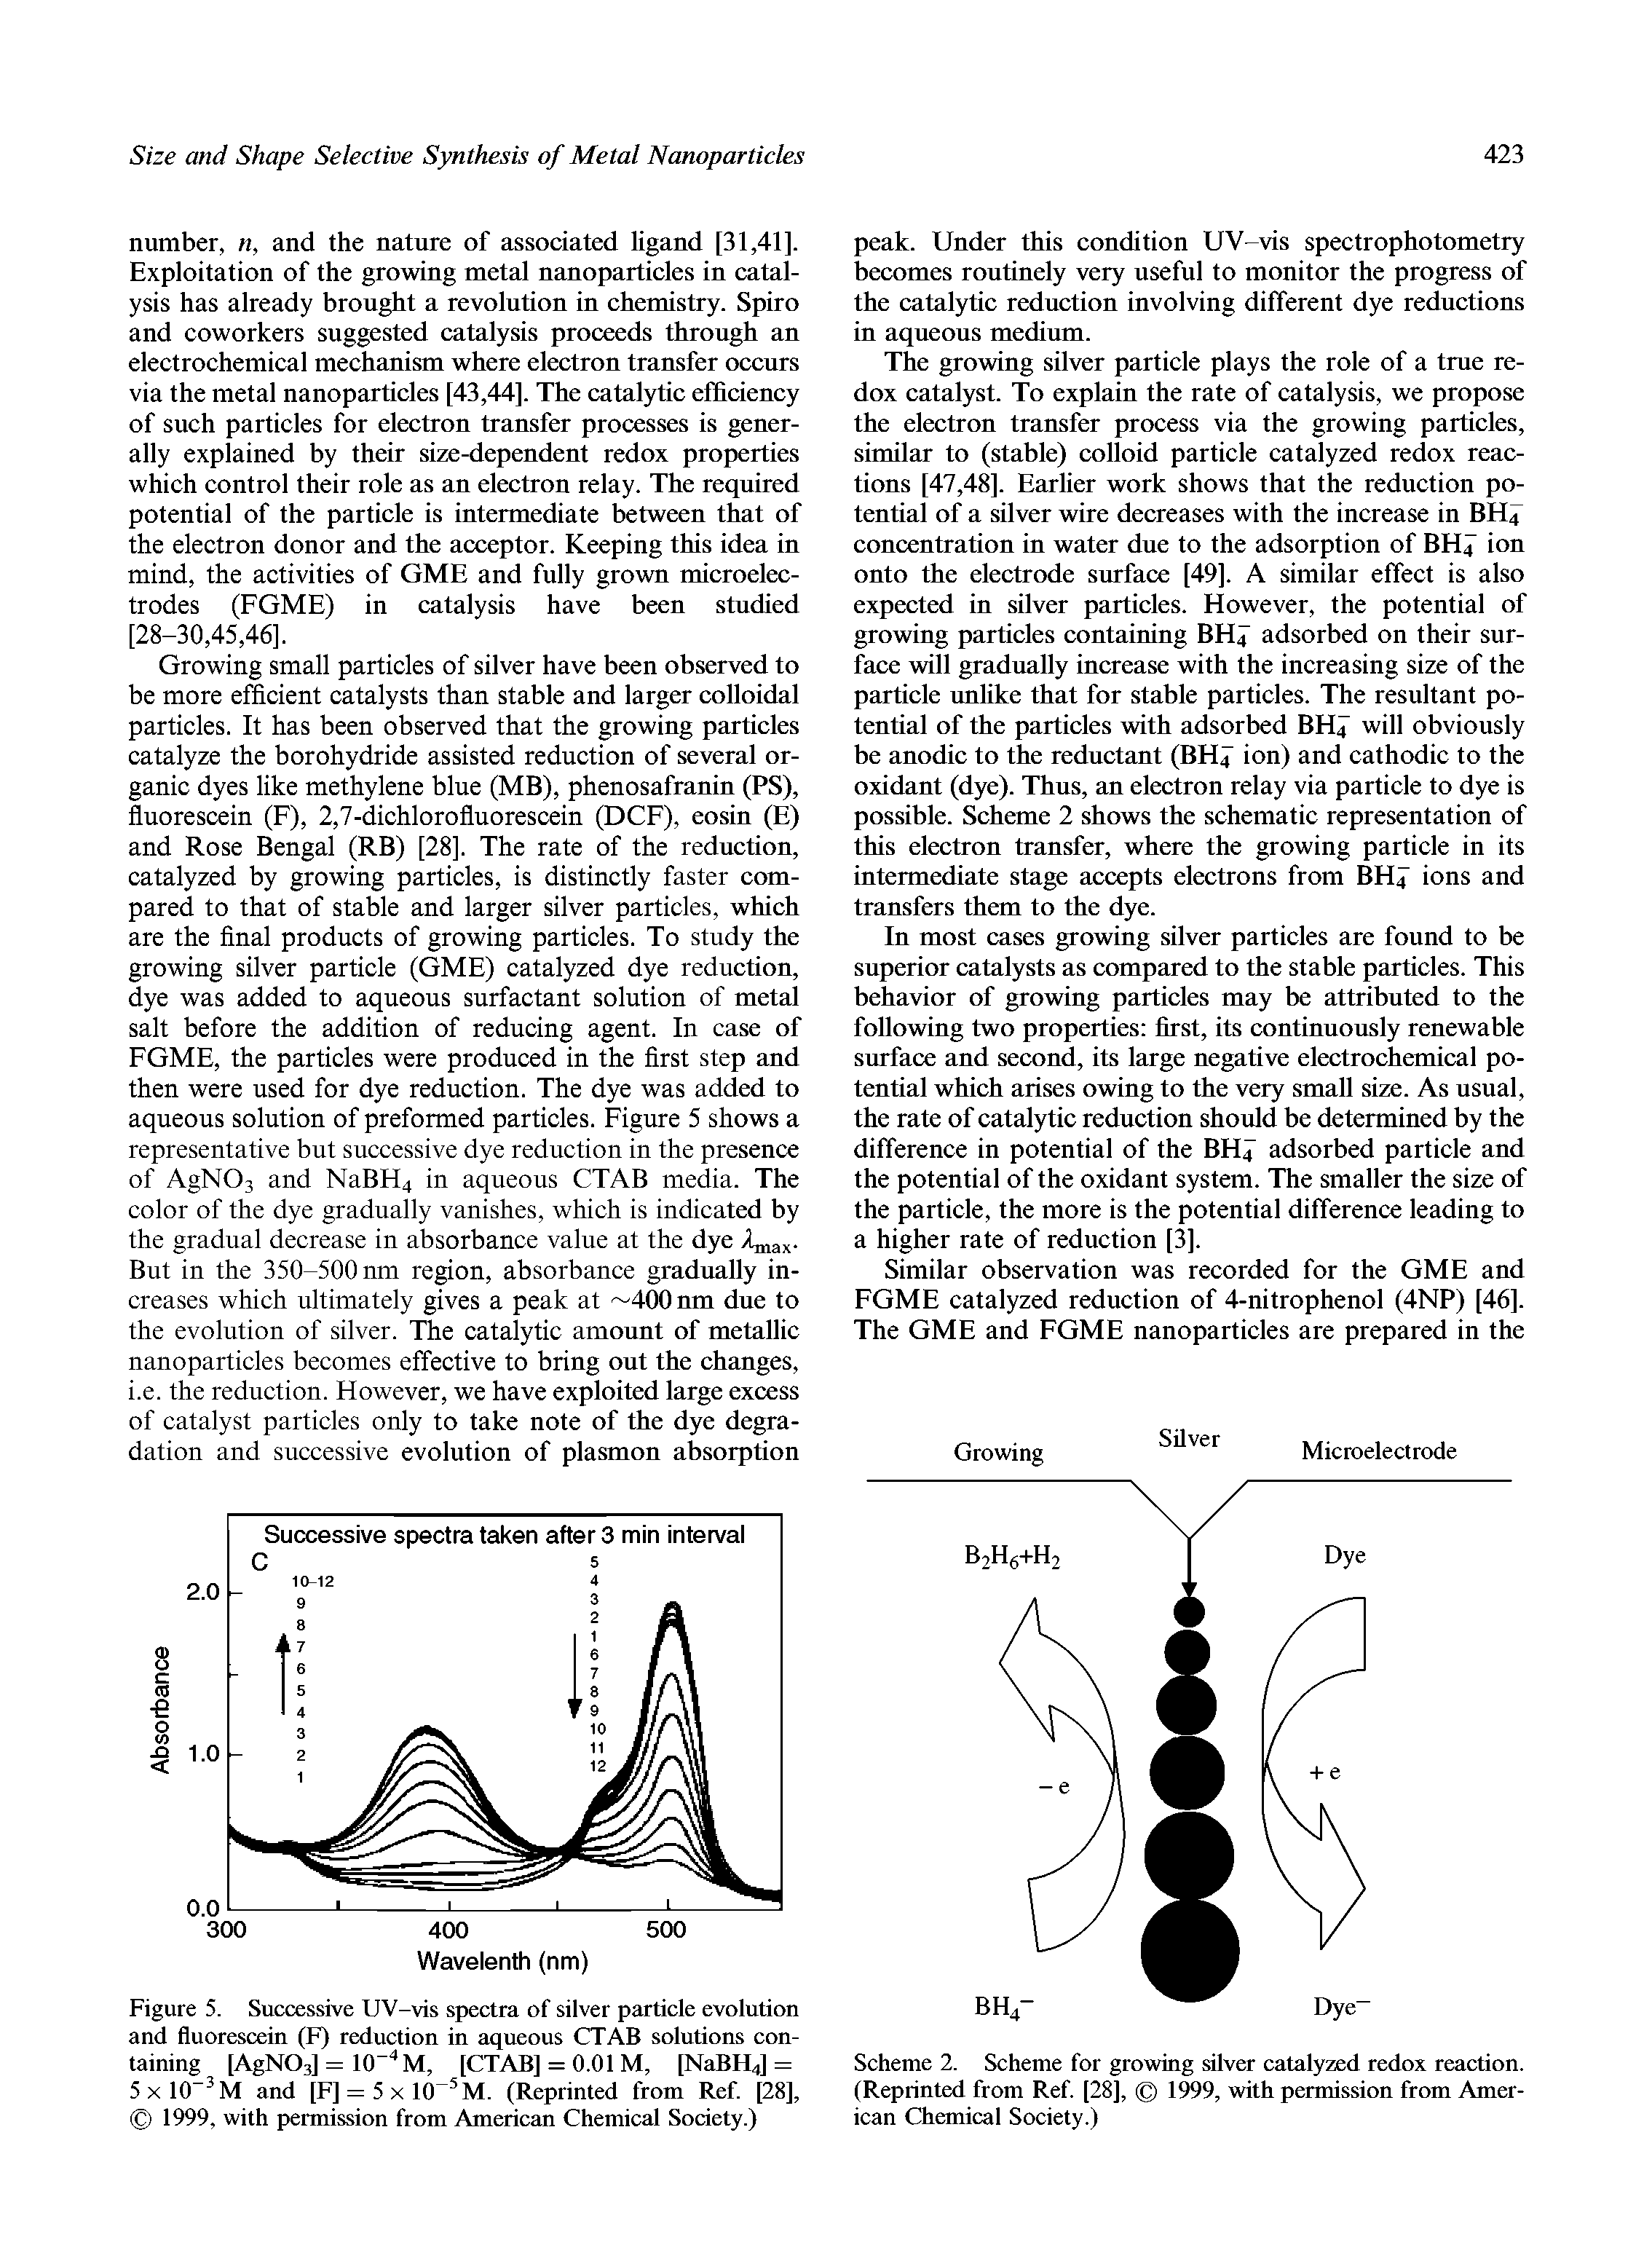 Figure 5. Successive UV-vis spectra of silver particle evolution and fluorescein (F) reduction in aqueous CTAB solutions containing [AgNOj] = 10 M, [CTAB] = 0.01 M, [NaBHJ = 5xl0 M and [F] = 5xl0 M. (Reprinted from Ref [28], 1999, with permission from American Chemical Society.)...